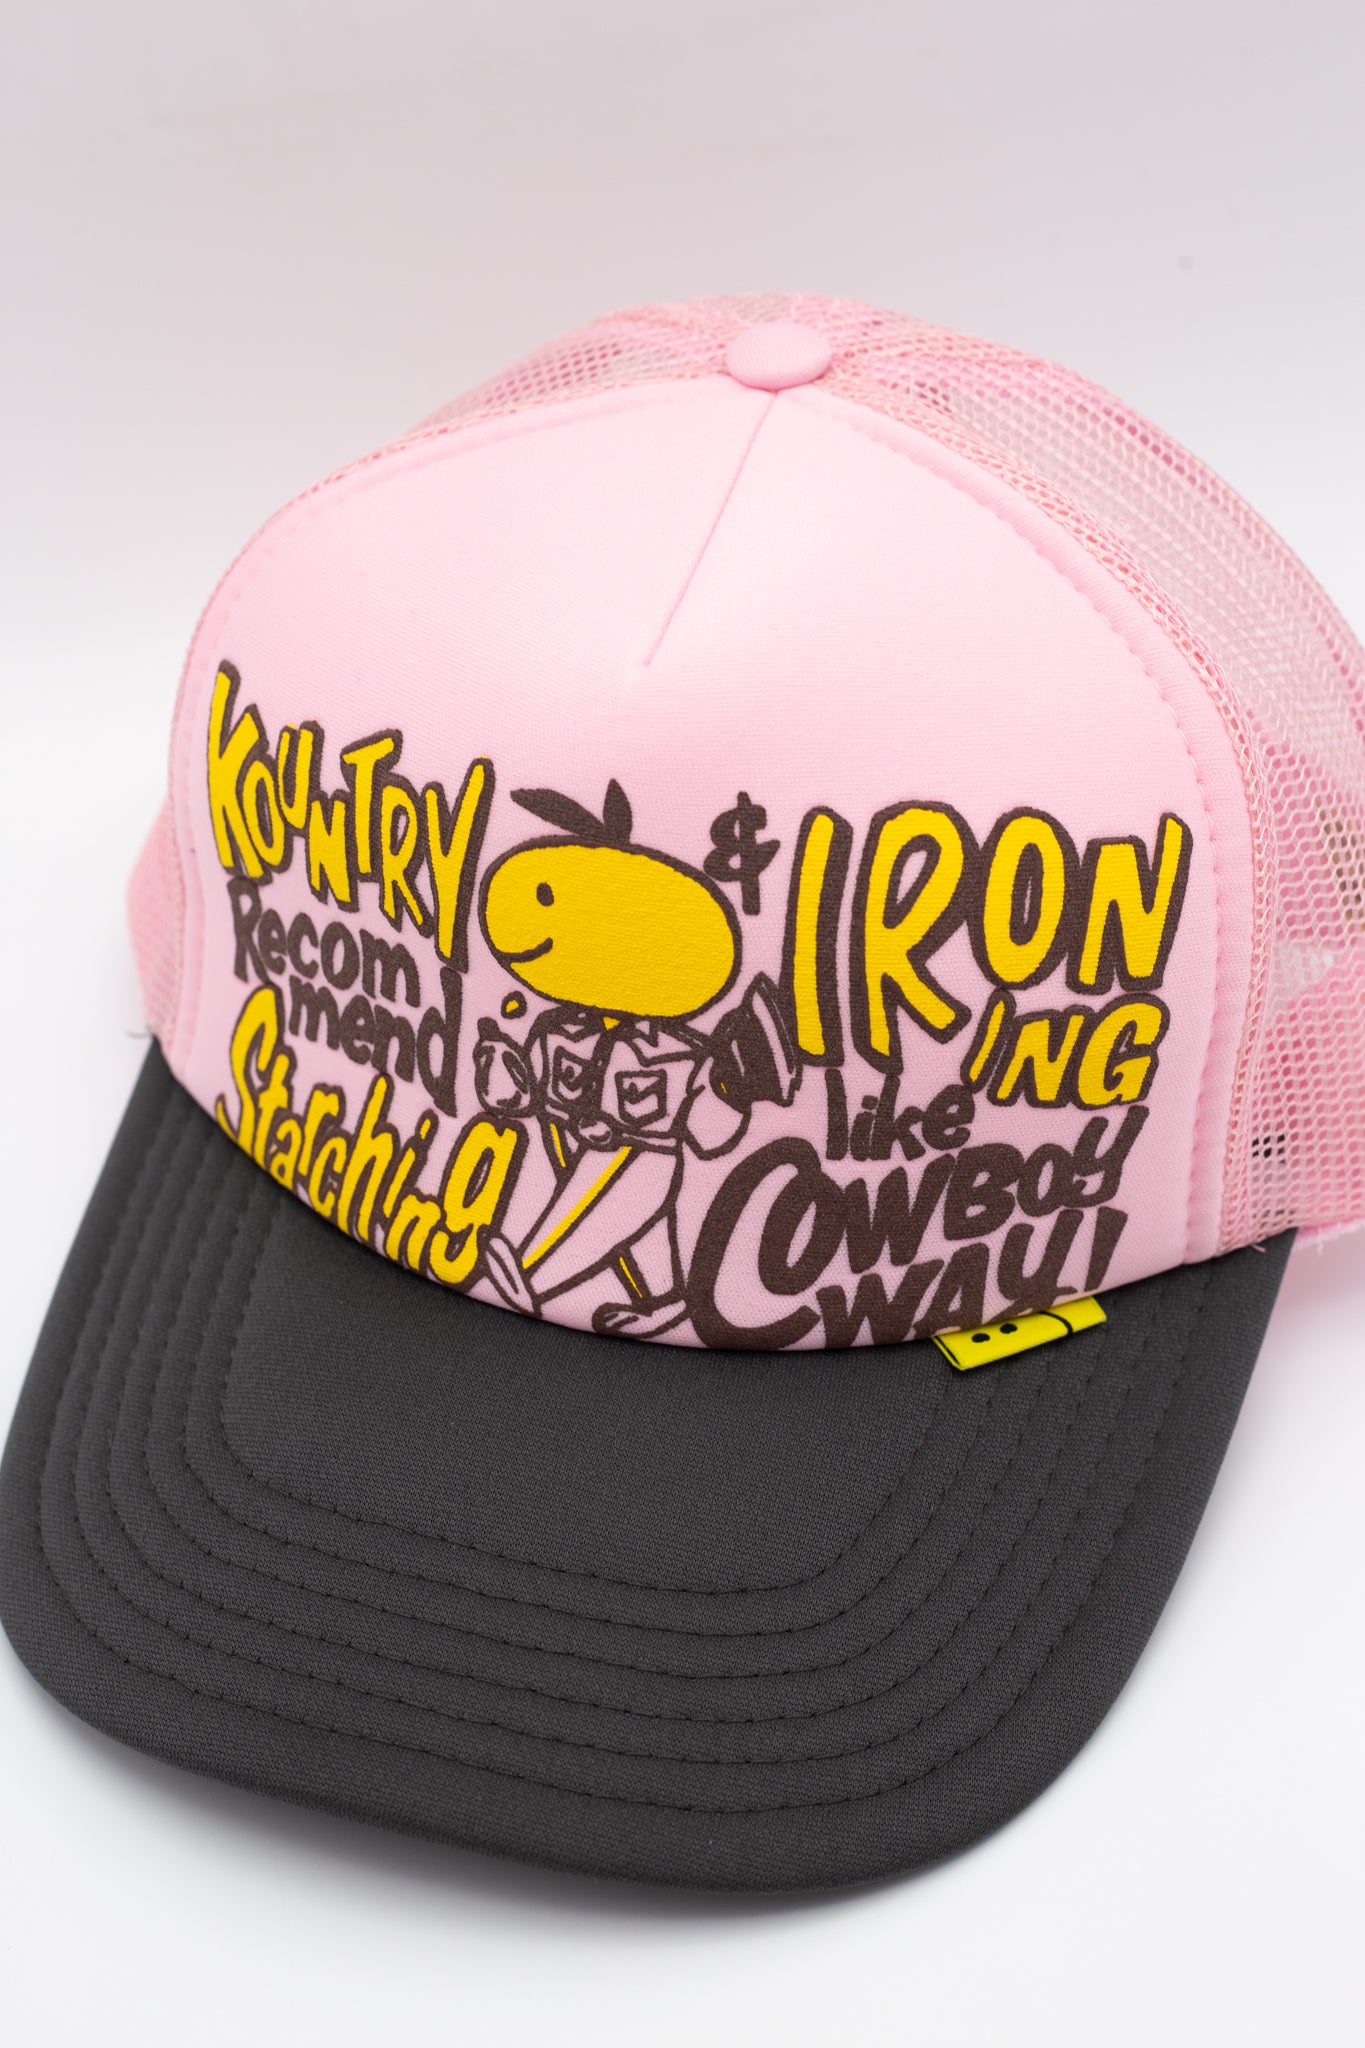 CONEYCOWBOWY Trucker Cap - Pink x Charcoal Grey